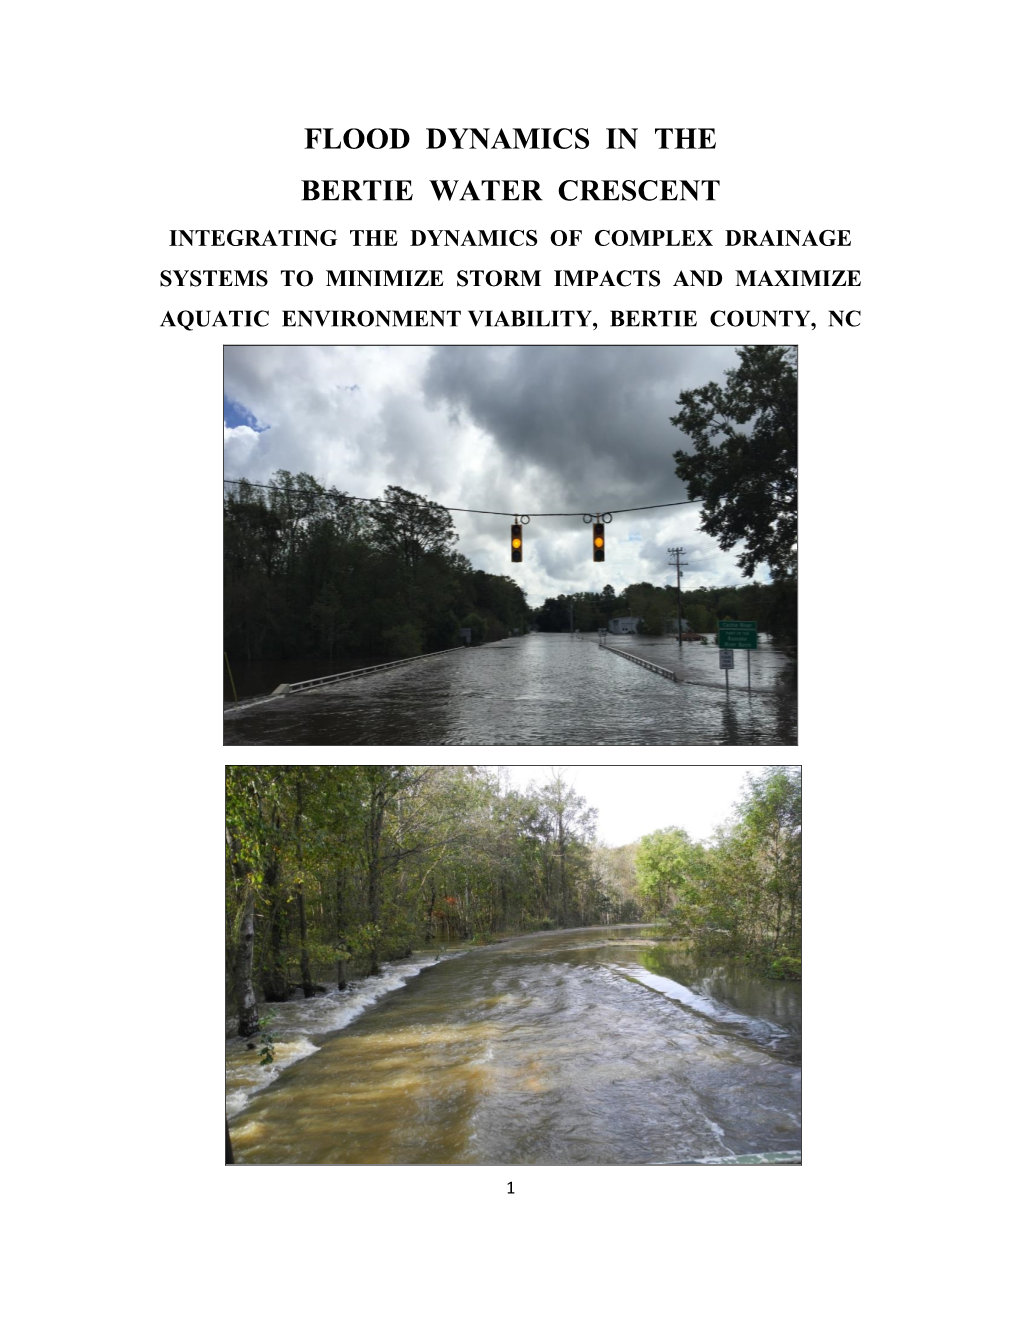 Flood Dynamics in the Bertie Water Crescent